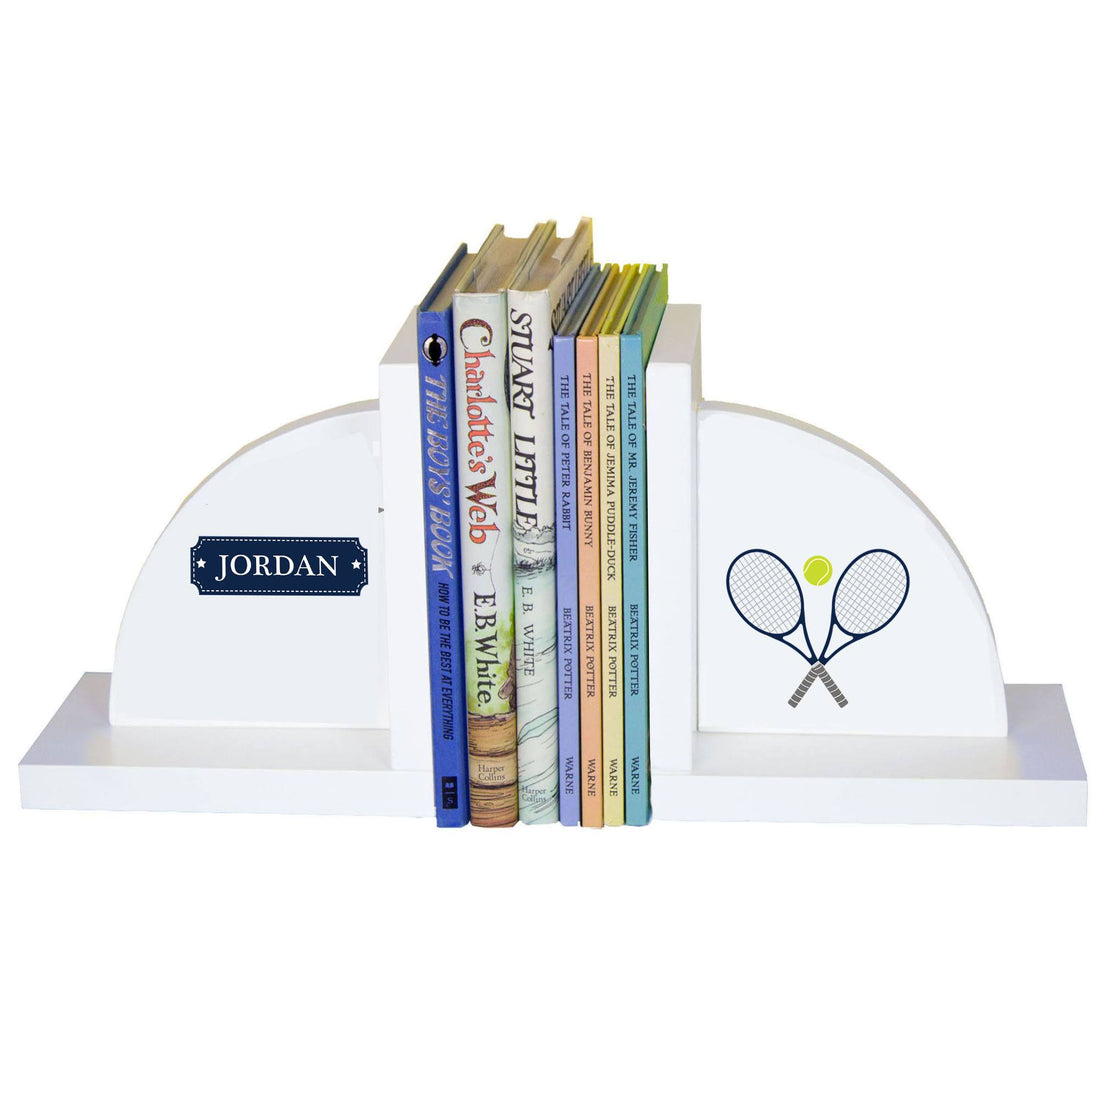 Personalized White Bookends with Tennis design